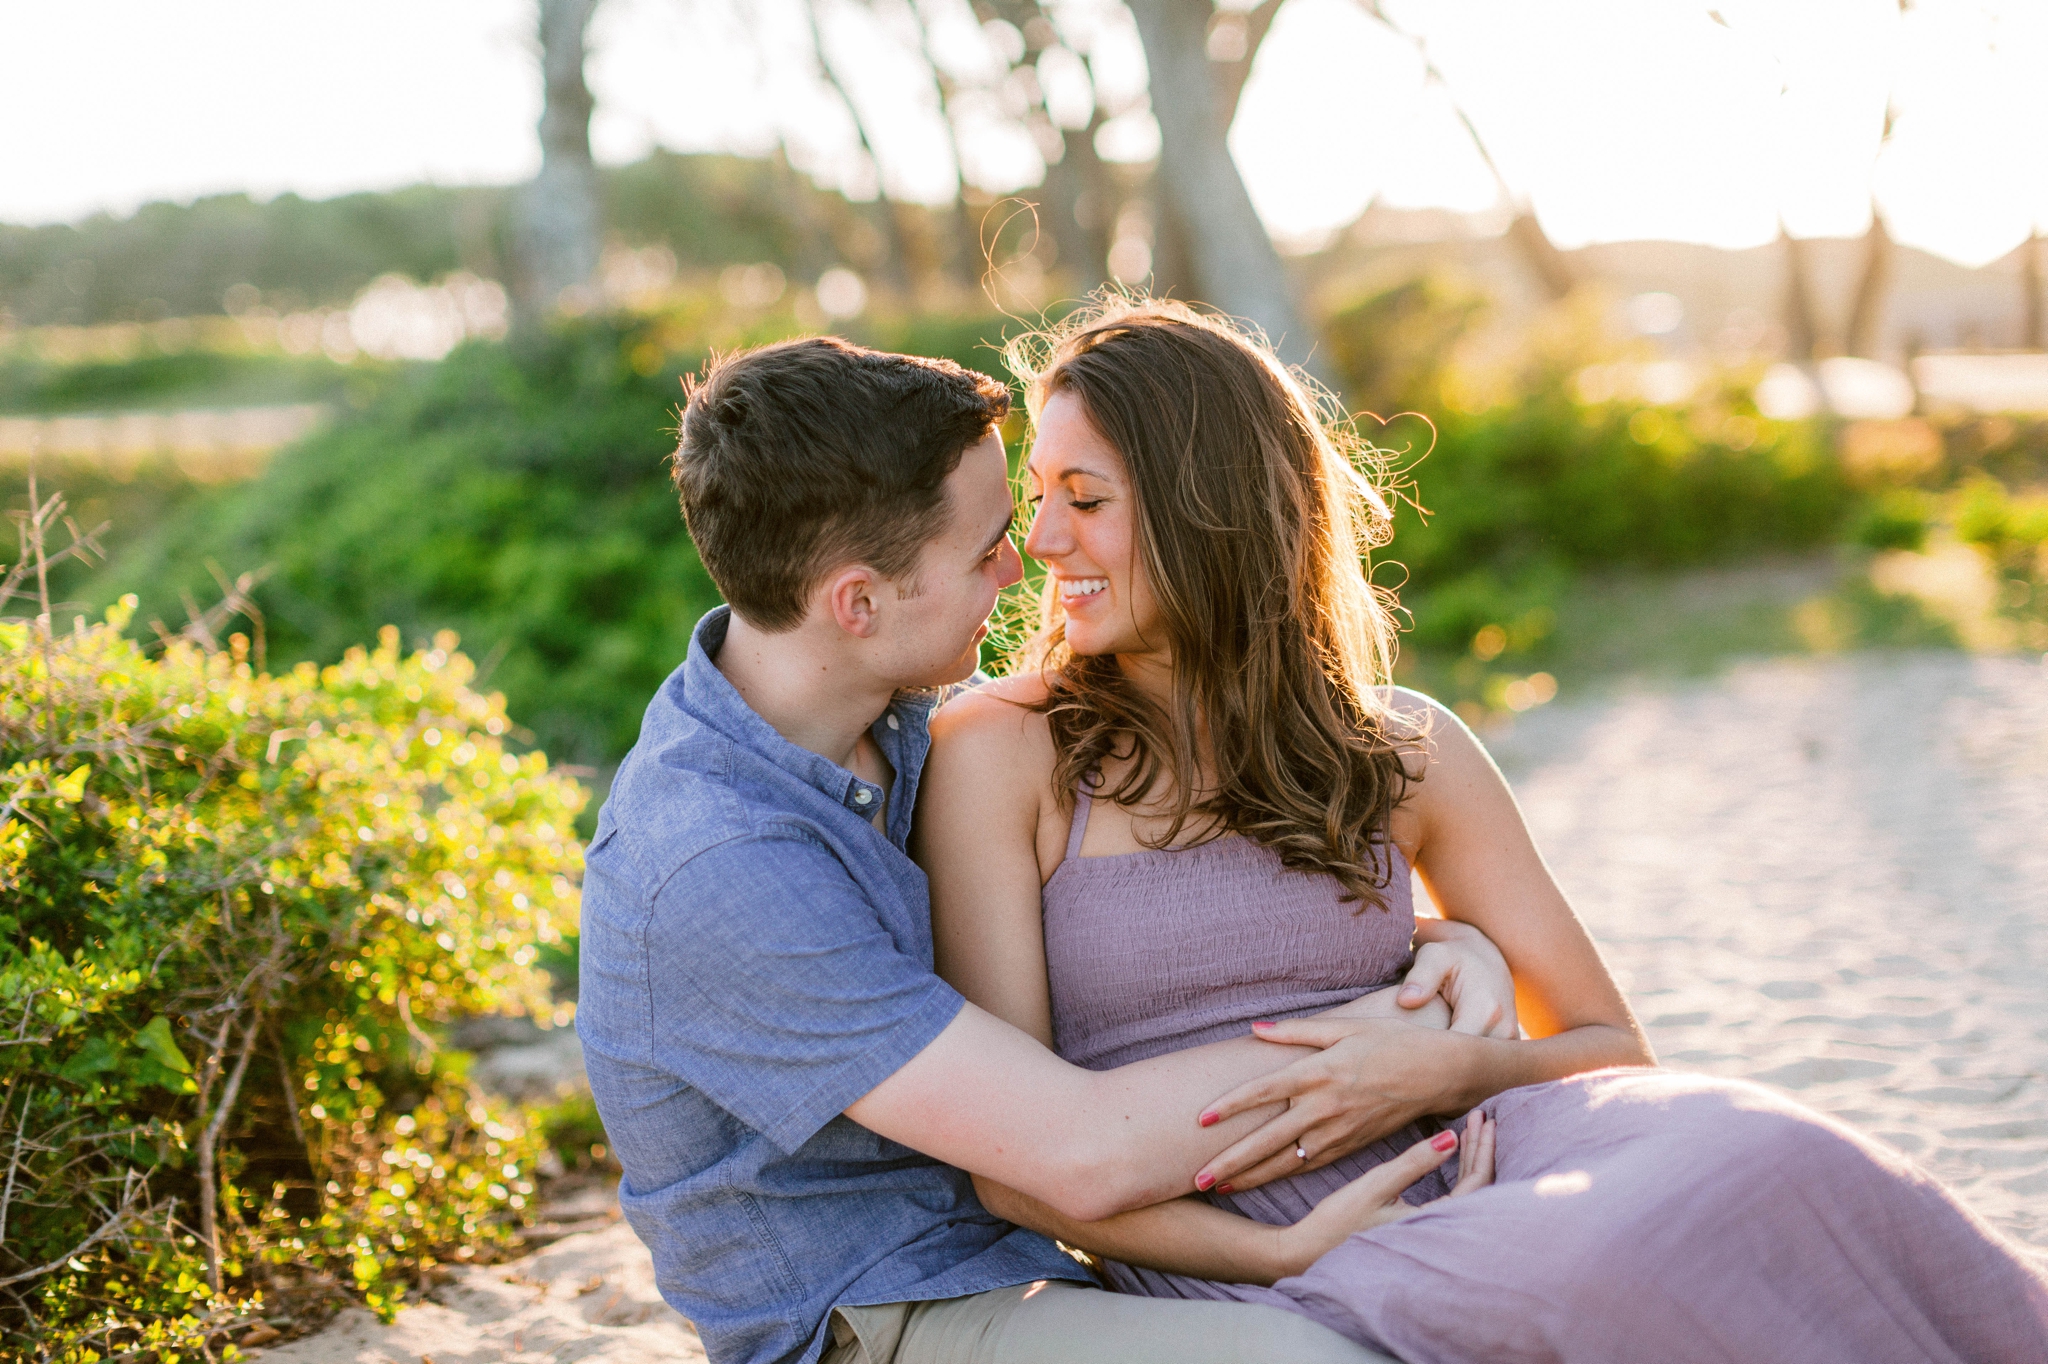  couple cuddeling  on the beach in front of live oak trees with the sunset behind them - Woman is in a flowy pastel maxi dress - outdoor golden light session - engagement photographer in honolulu, oahu, hawaii - johanna dye photography 